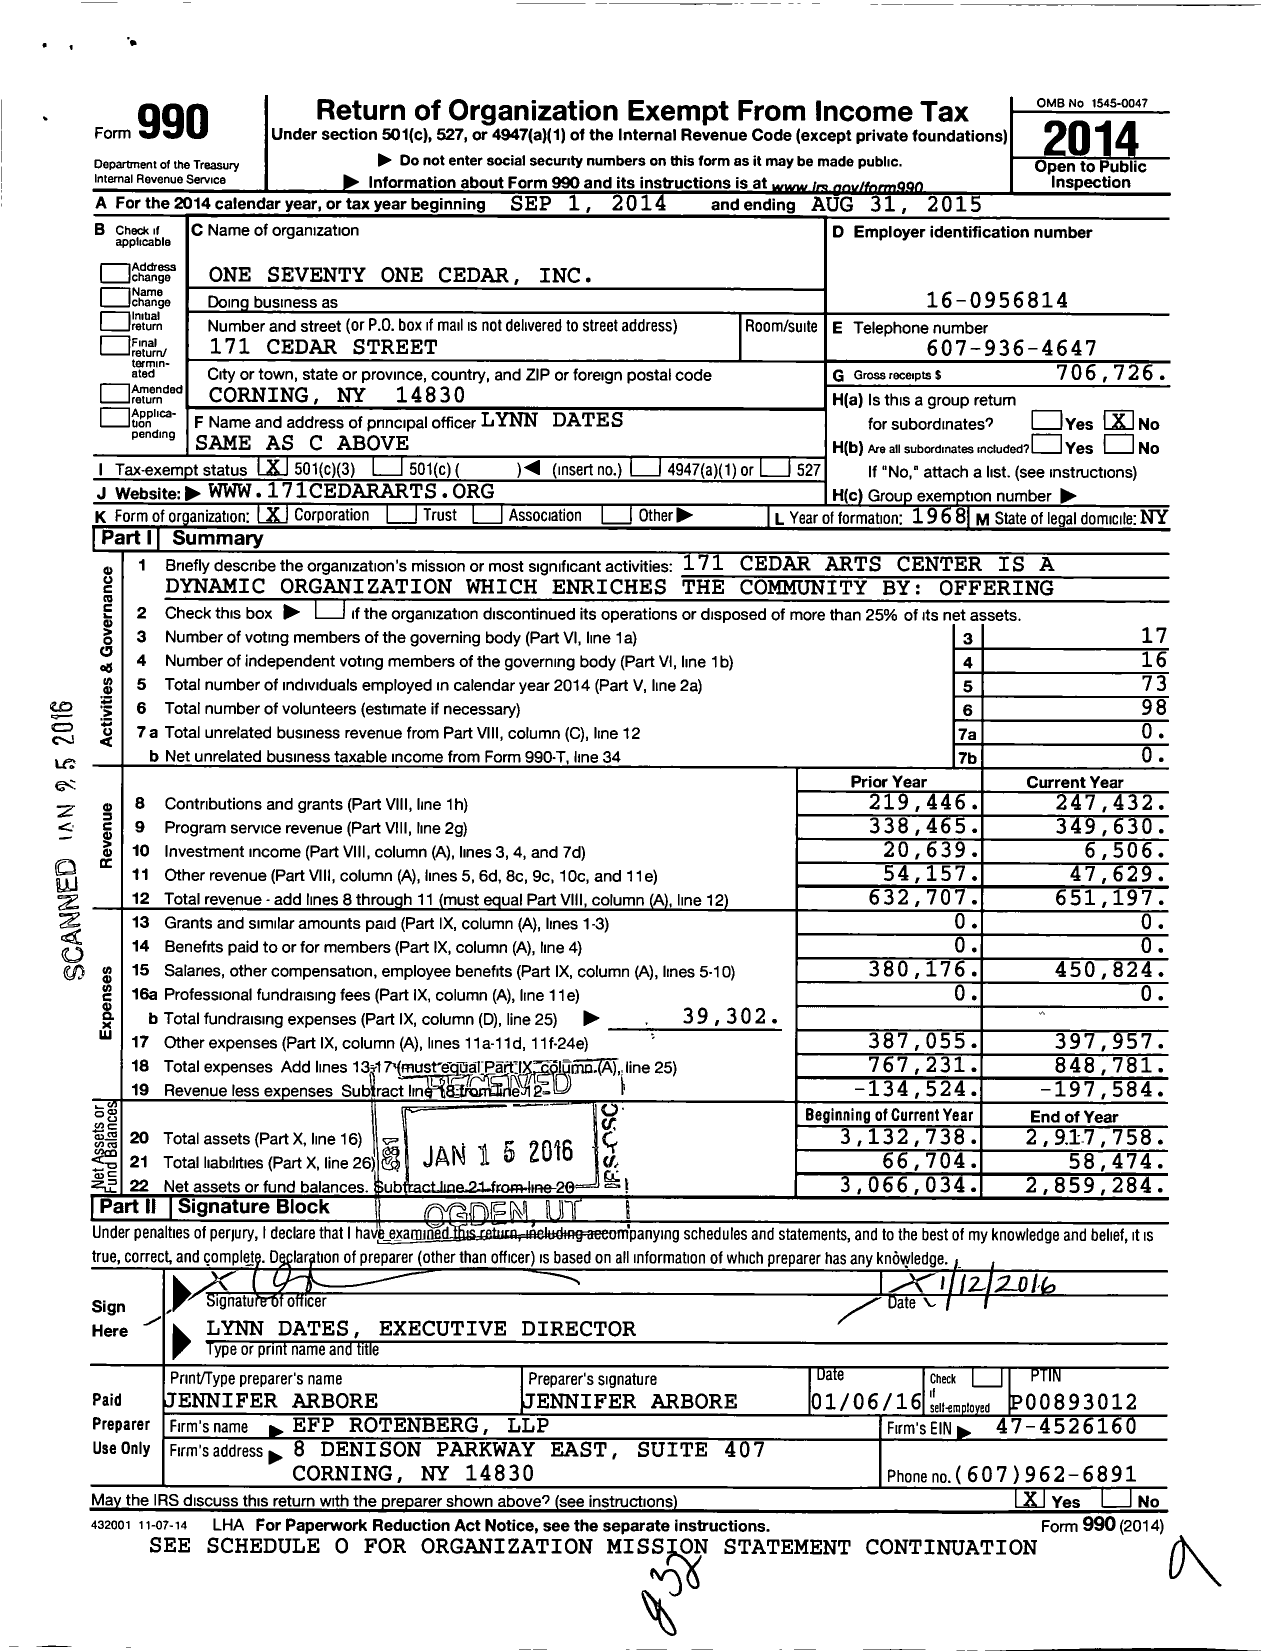 Image of first page of 2014 Form 990 for One Seventy One Cedar